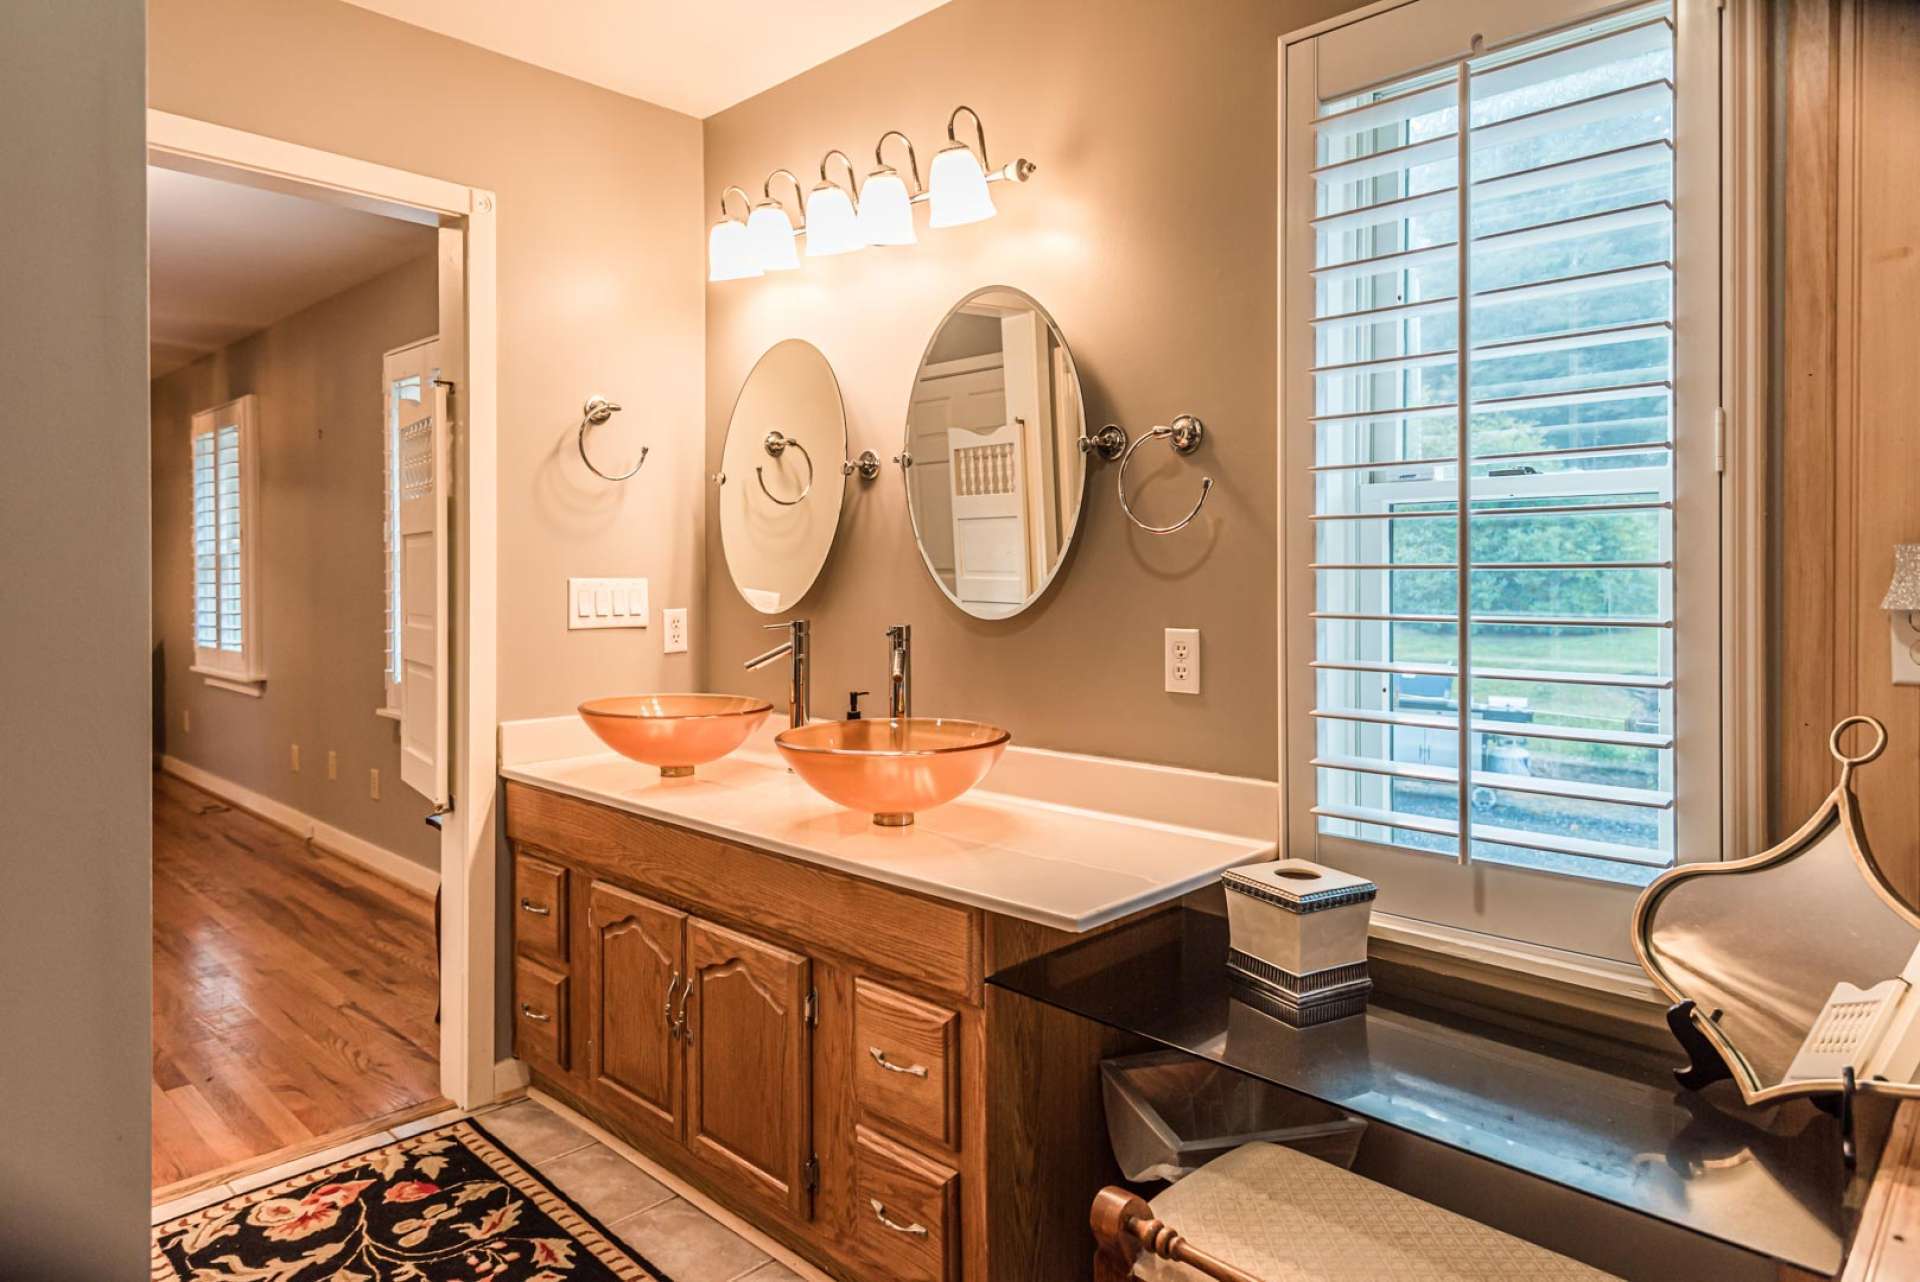 The master bath offers a double vanity, jetted tub, and separate shower.